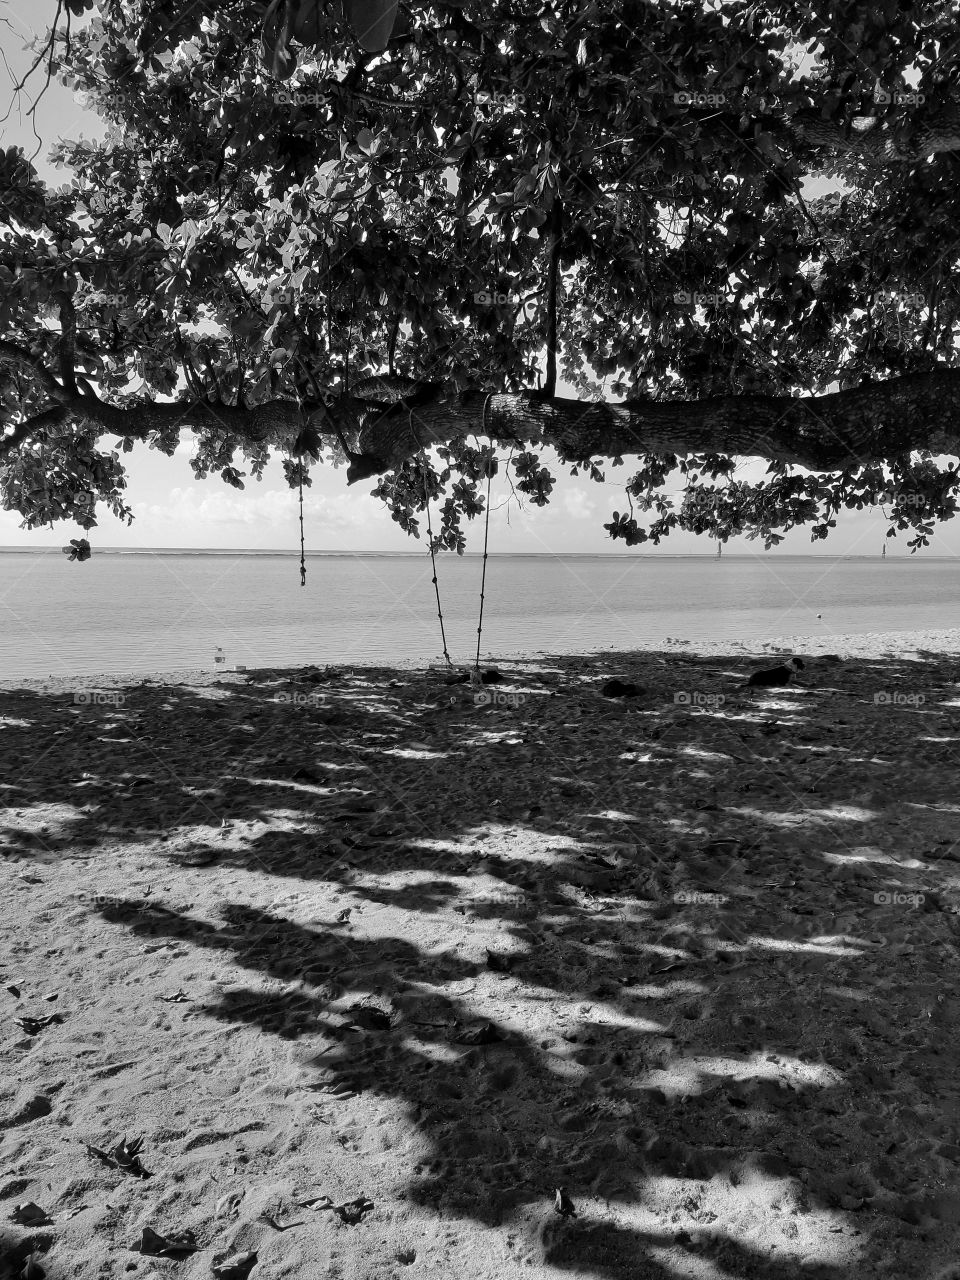 The monochrome of a tree with a swing in the seaside